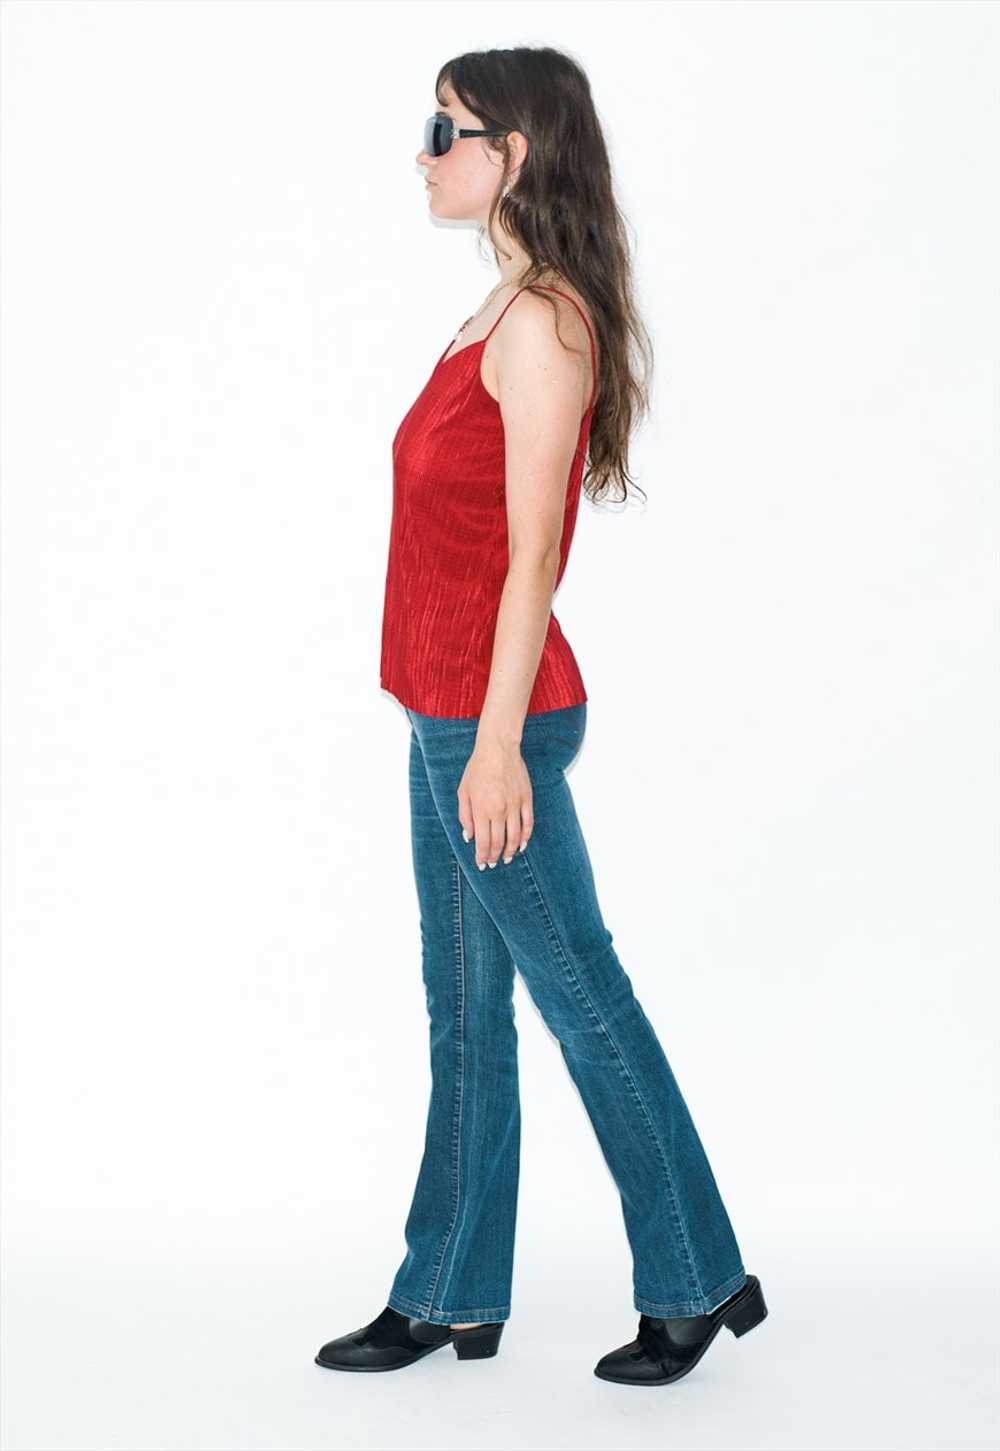 Vintage 90s stretchy cute sleeve-less top in red - image 2